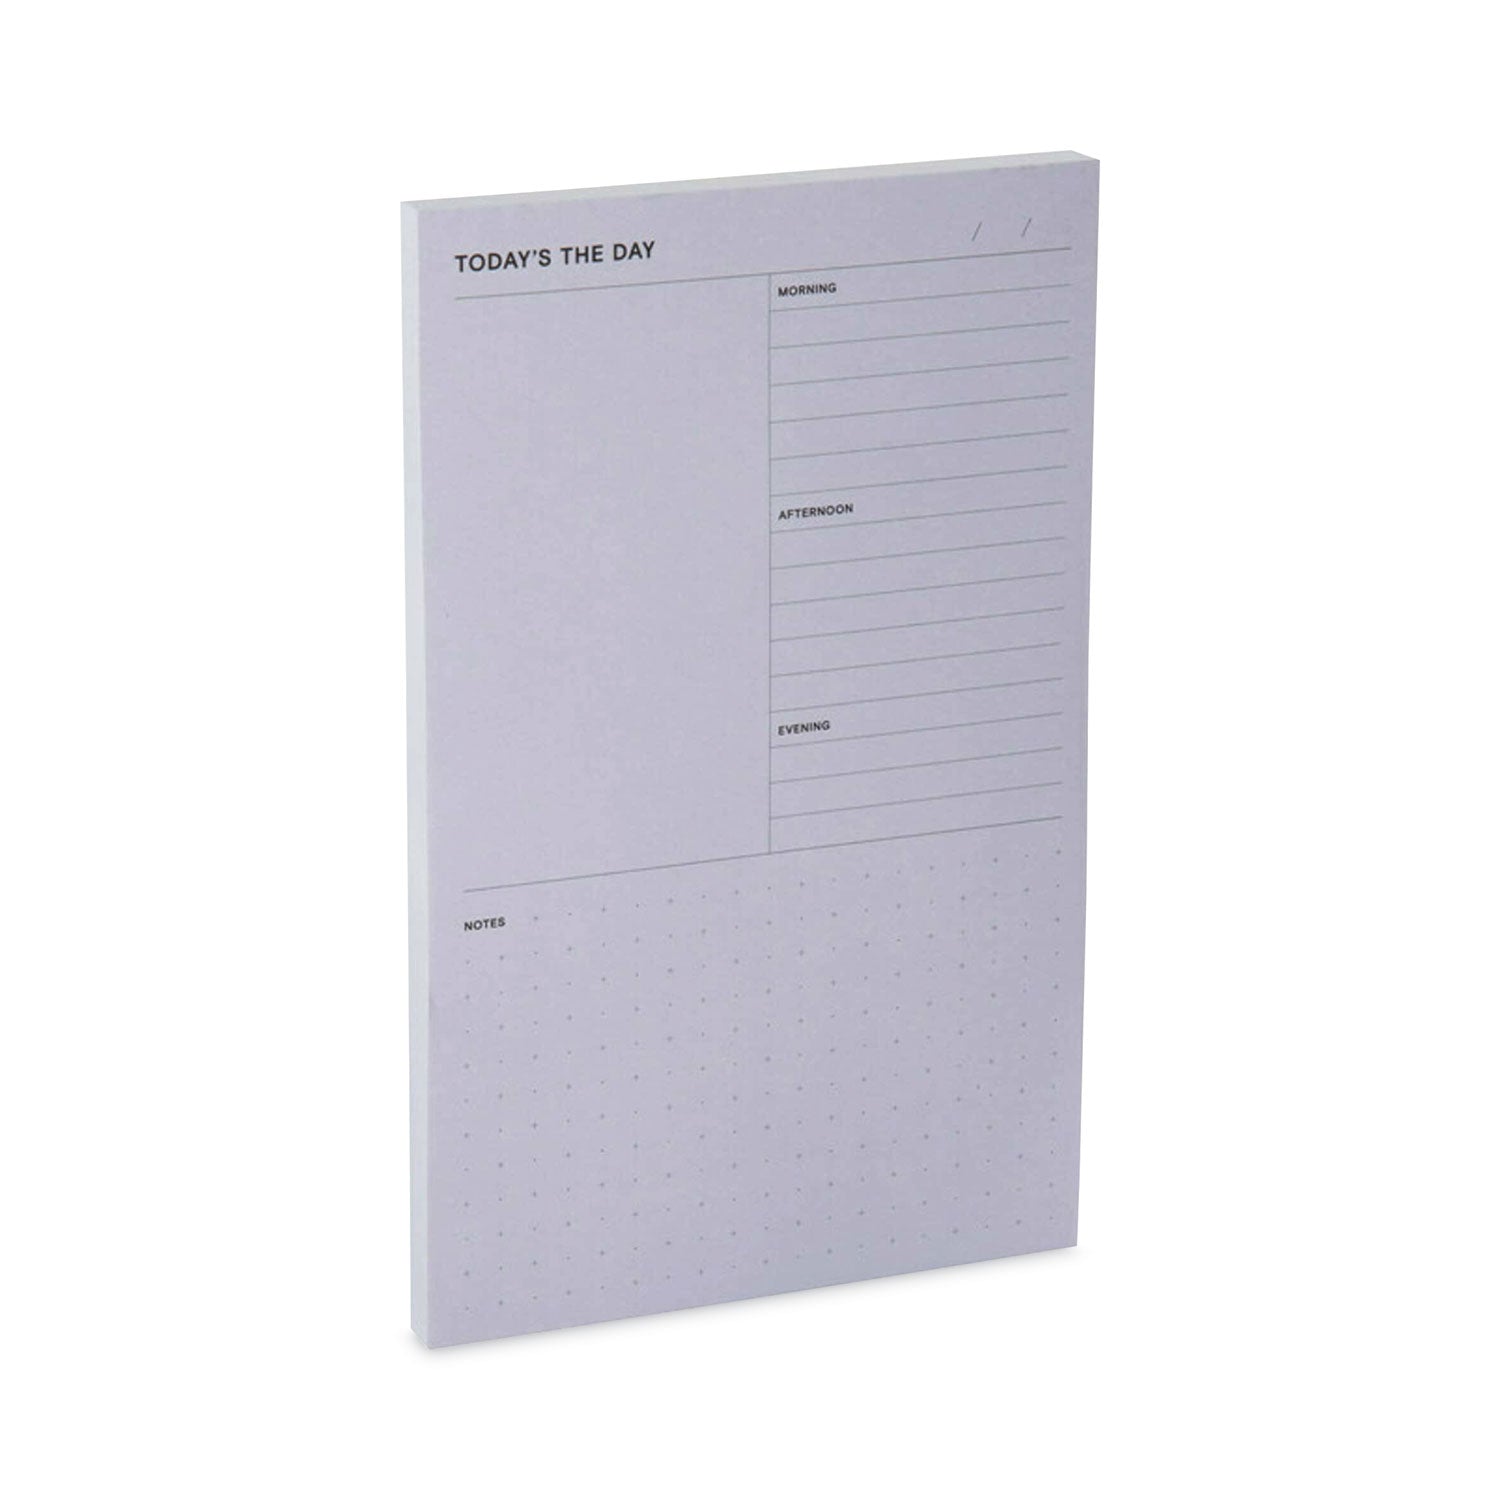 adhesive-daily-planner-sticky-note-pads-daily-planner-format-49-x-77-gray-100-sheets-pad_mmm58gry - 6